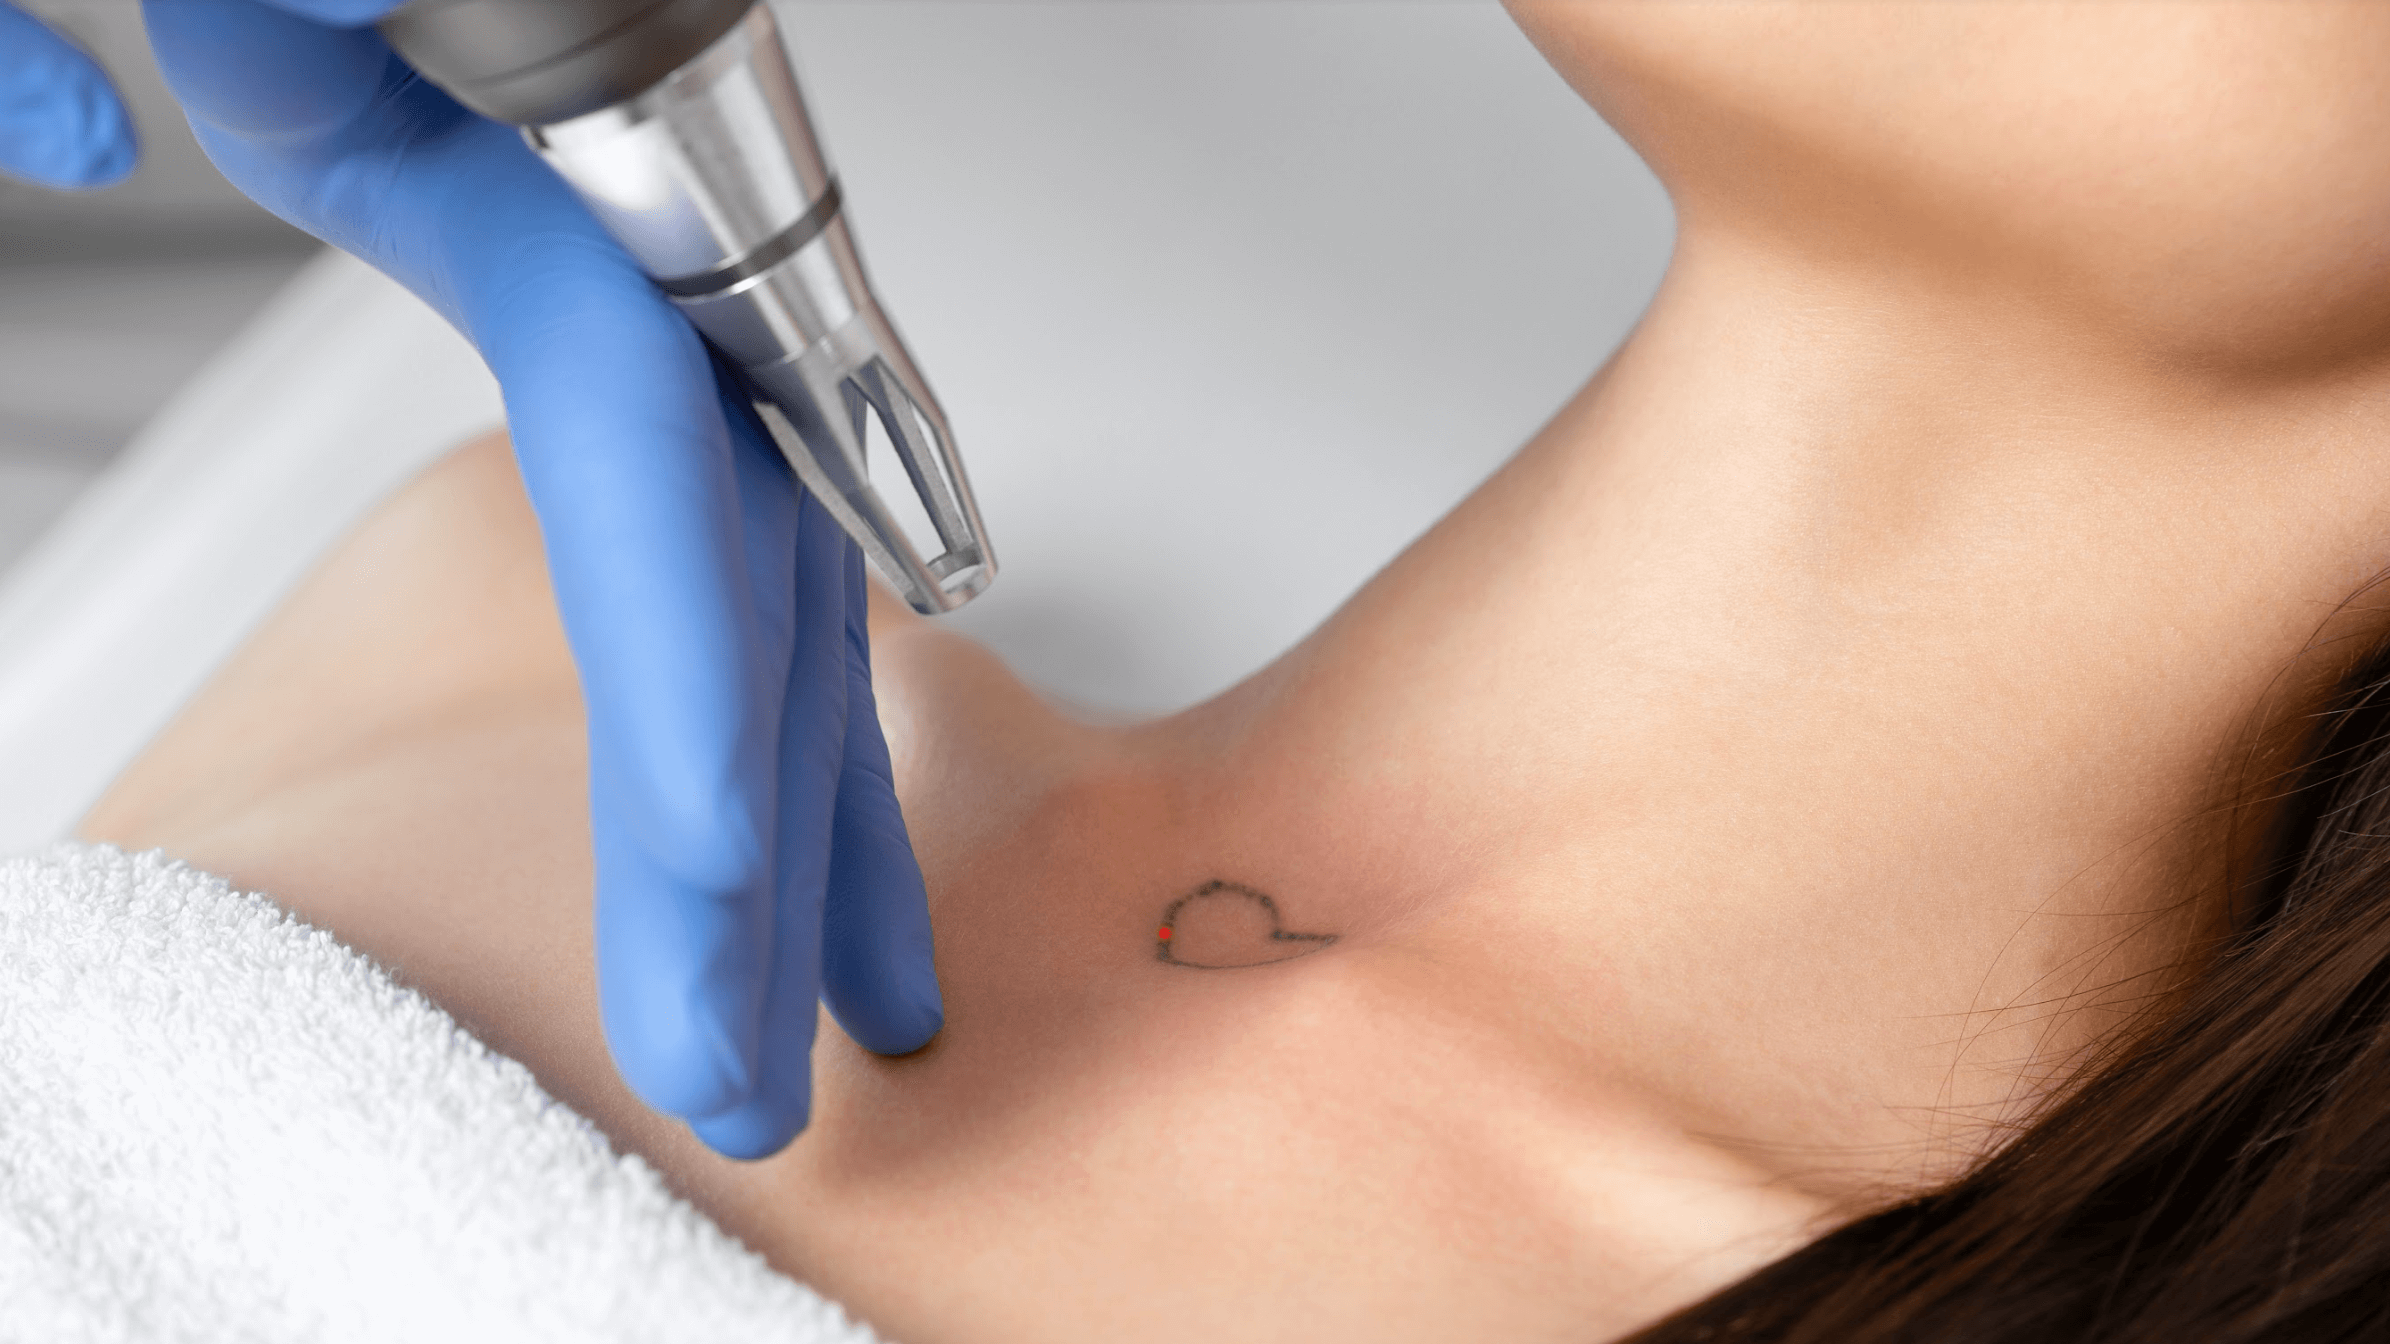 How Painful Is Laser Tattoo Removal?